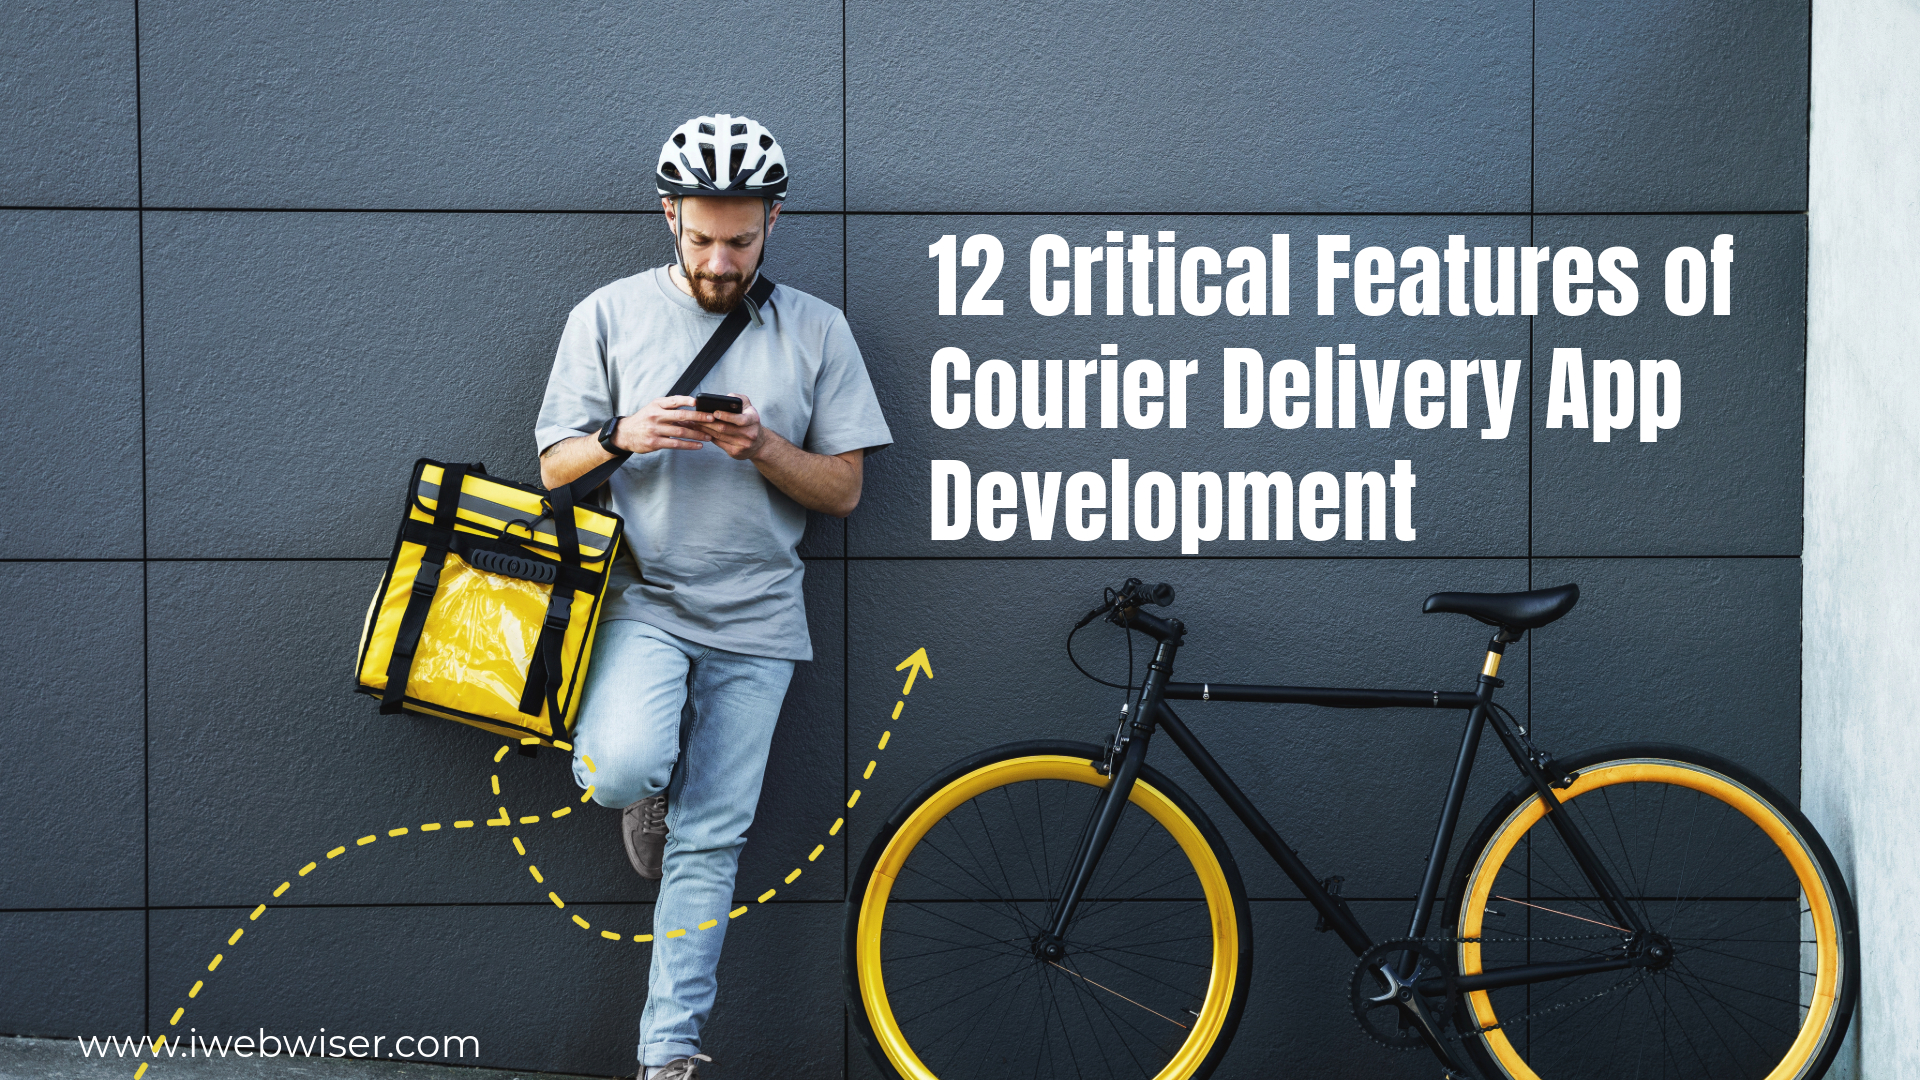 12 Critical Features of Courier Delivery App Development